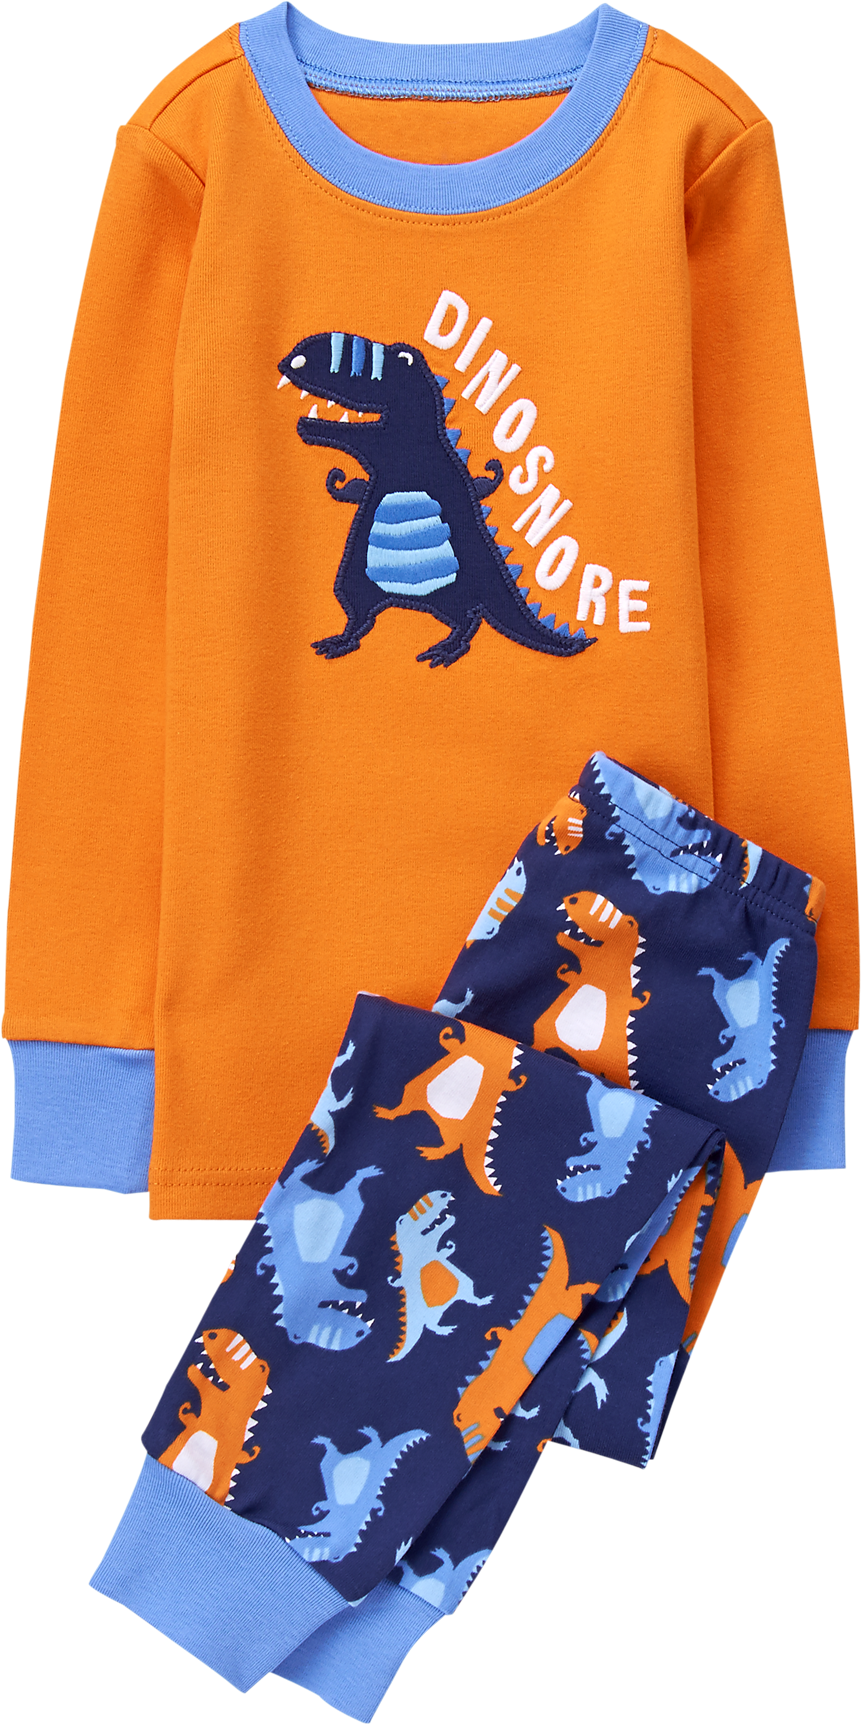 Dinosnore 2-piece Gymmies - Long-sleeved T-shirt (1400x1780)